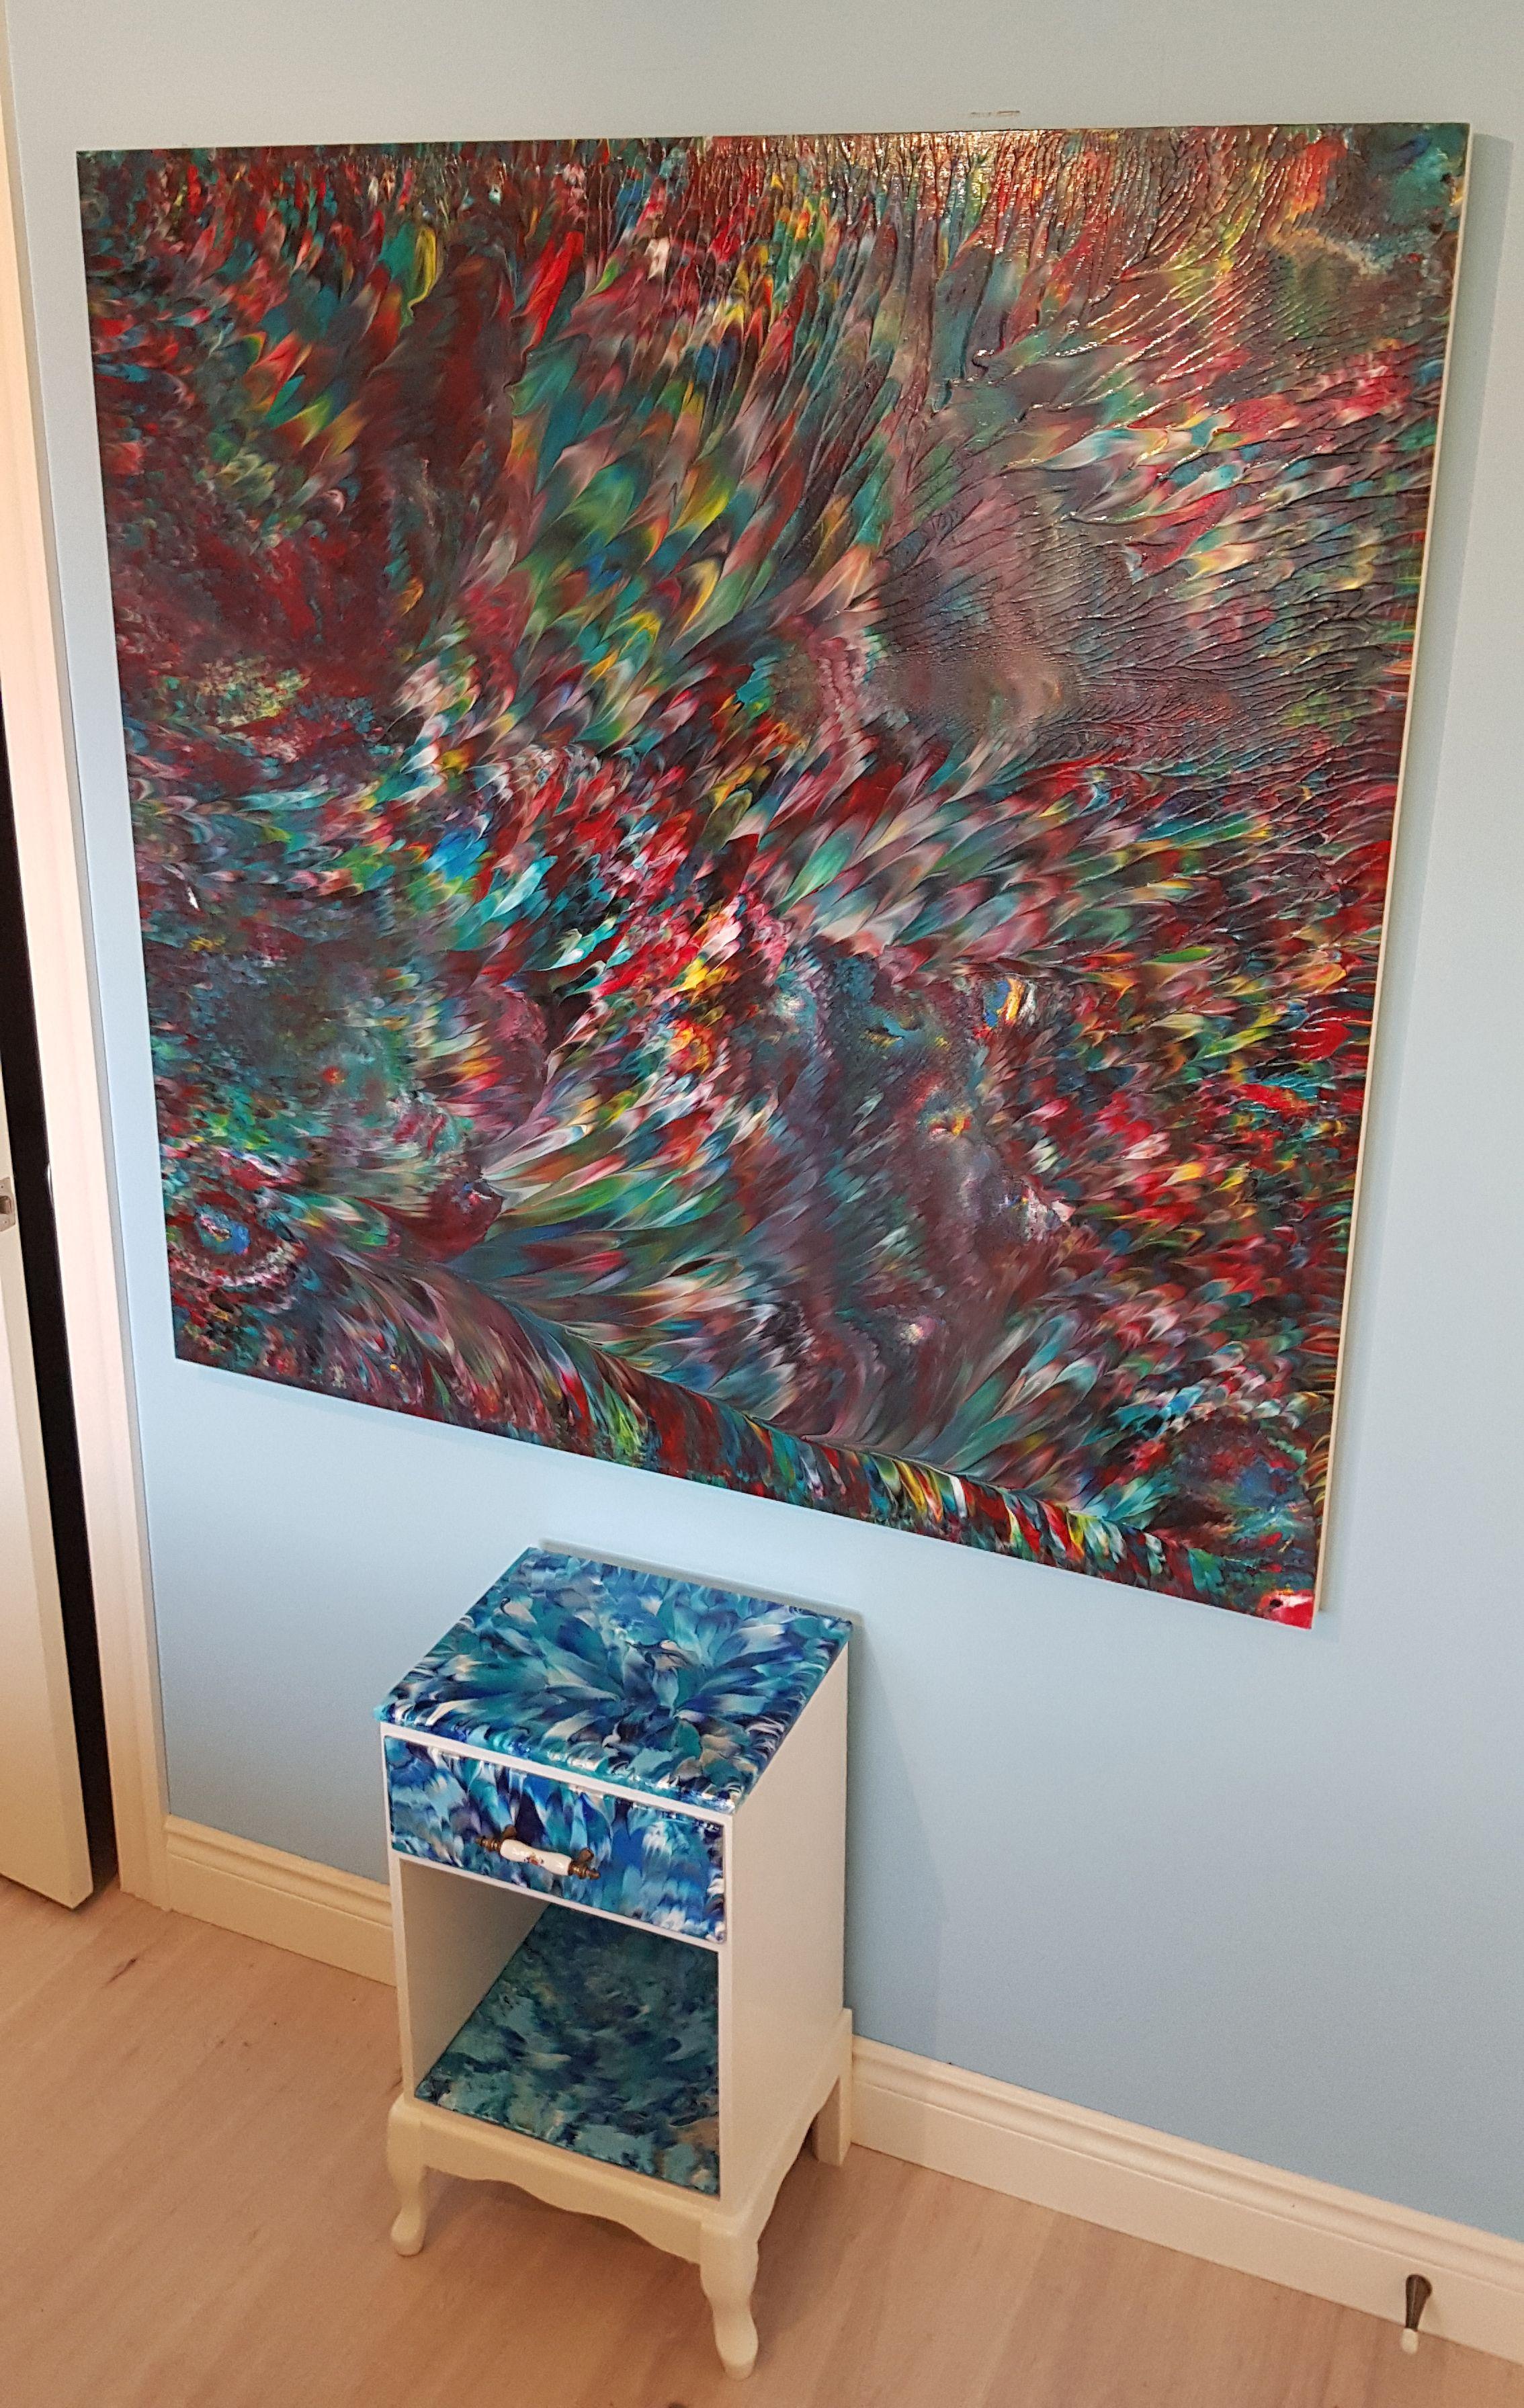 It is a large statement piece with vivid colors that catch the attention of anyone in the room; the lights in the room bounce off of the high-gloss finish and make the high-quality acrylic paints appear wet. Colors such as dark greens, teals,